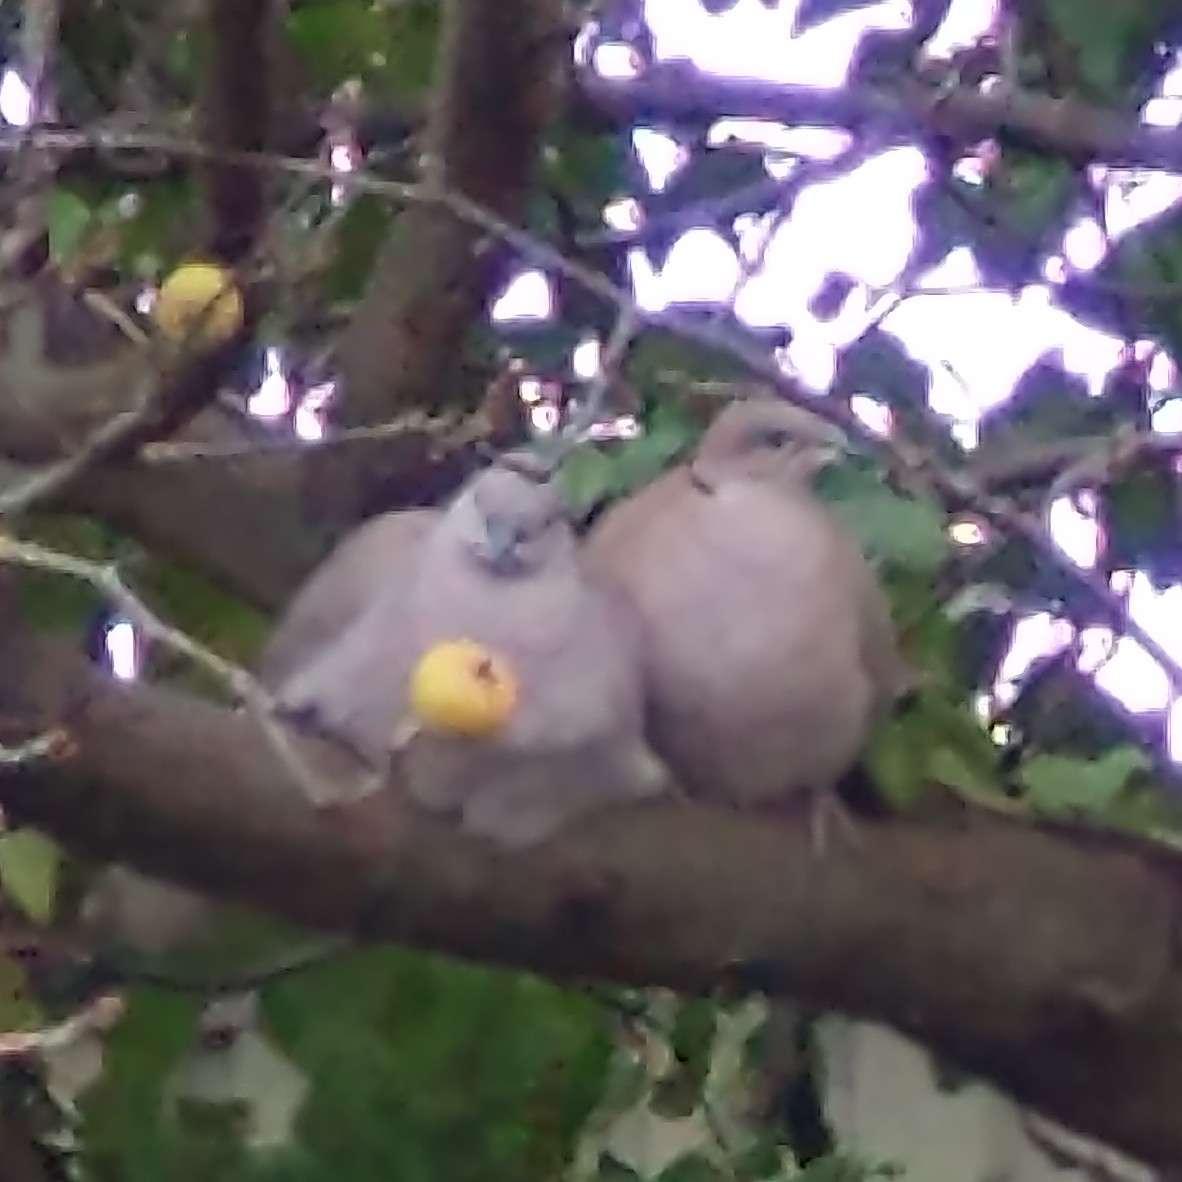 two collared doves sat on a branch, leaning against each other.